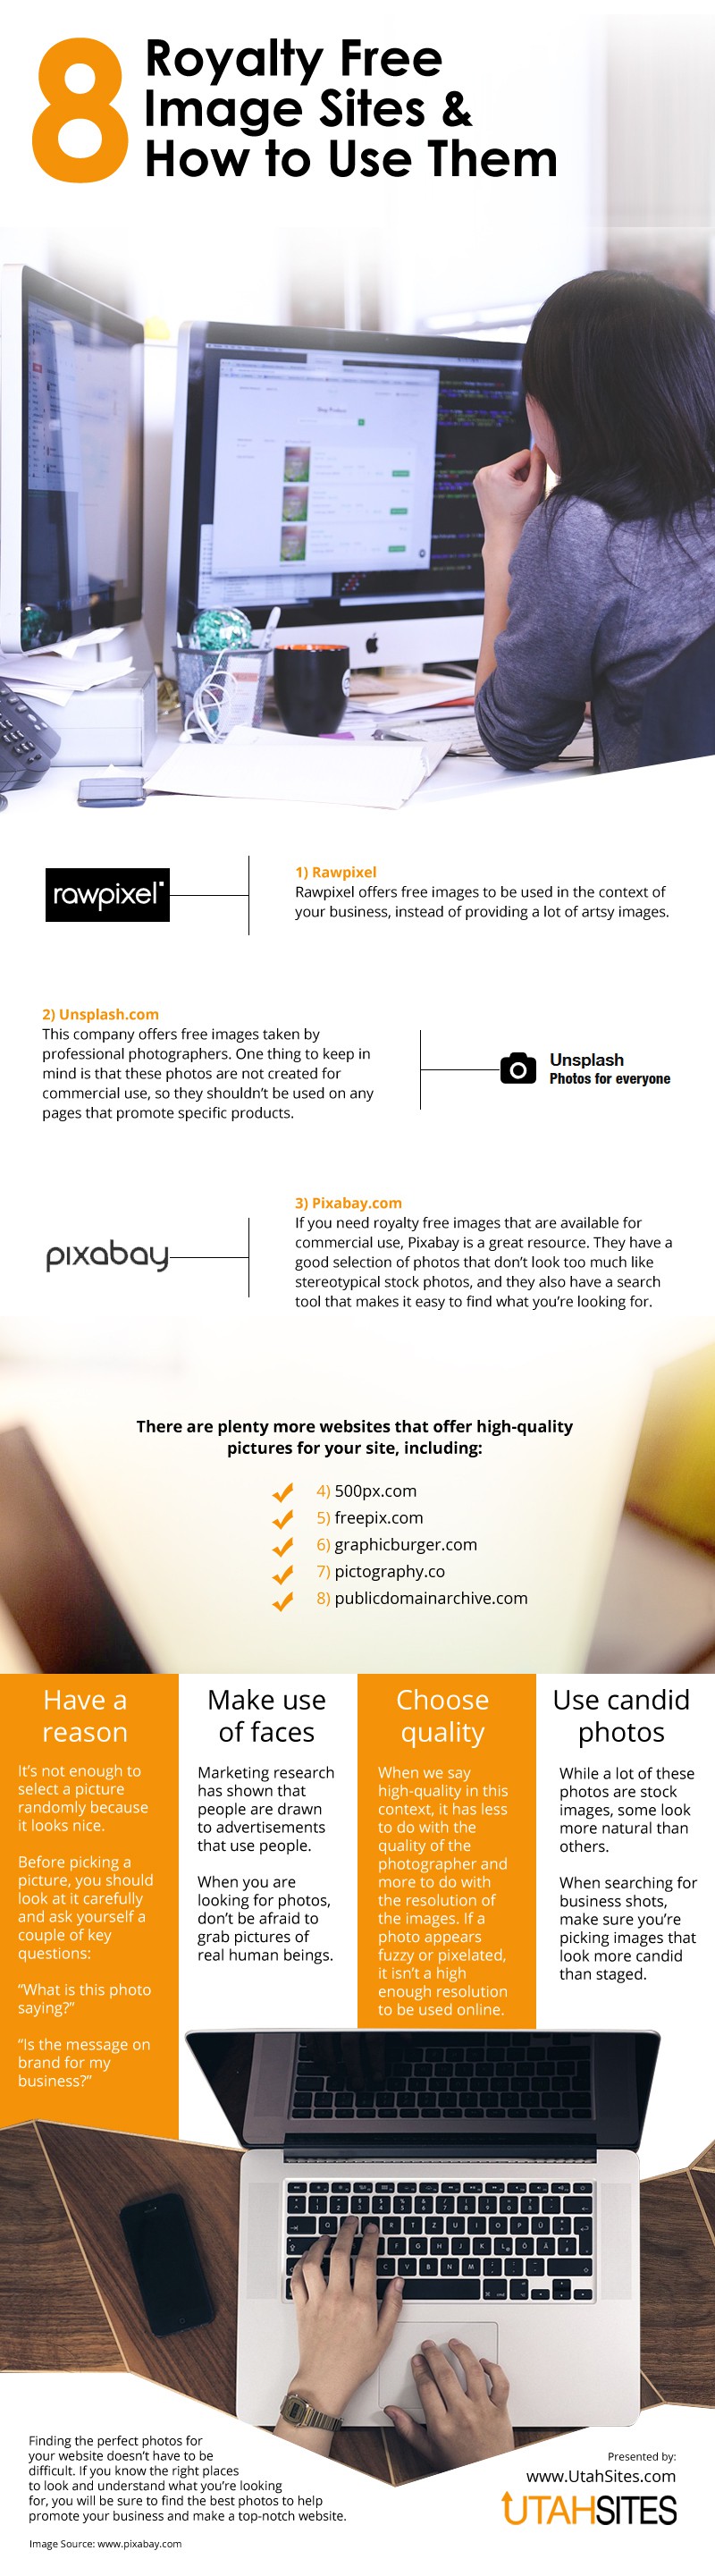 8 Royalty Free Image Sites & How to Use Them Infographic